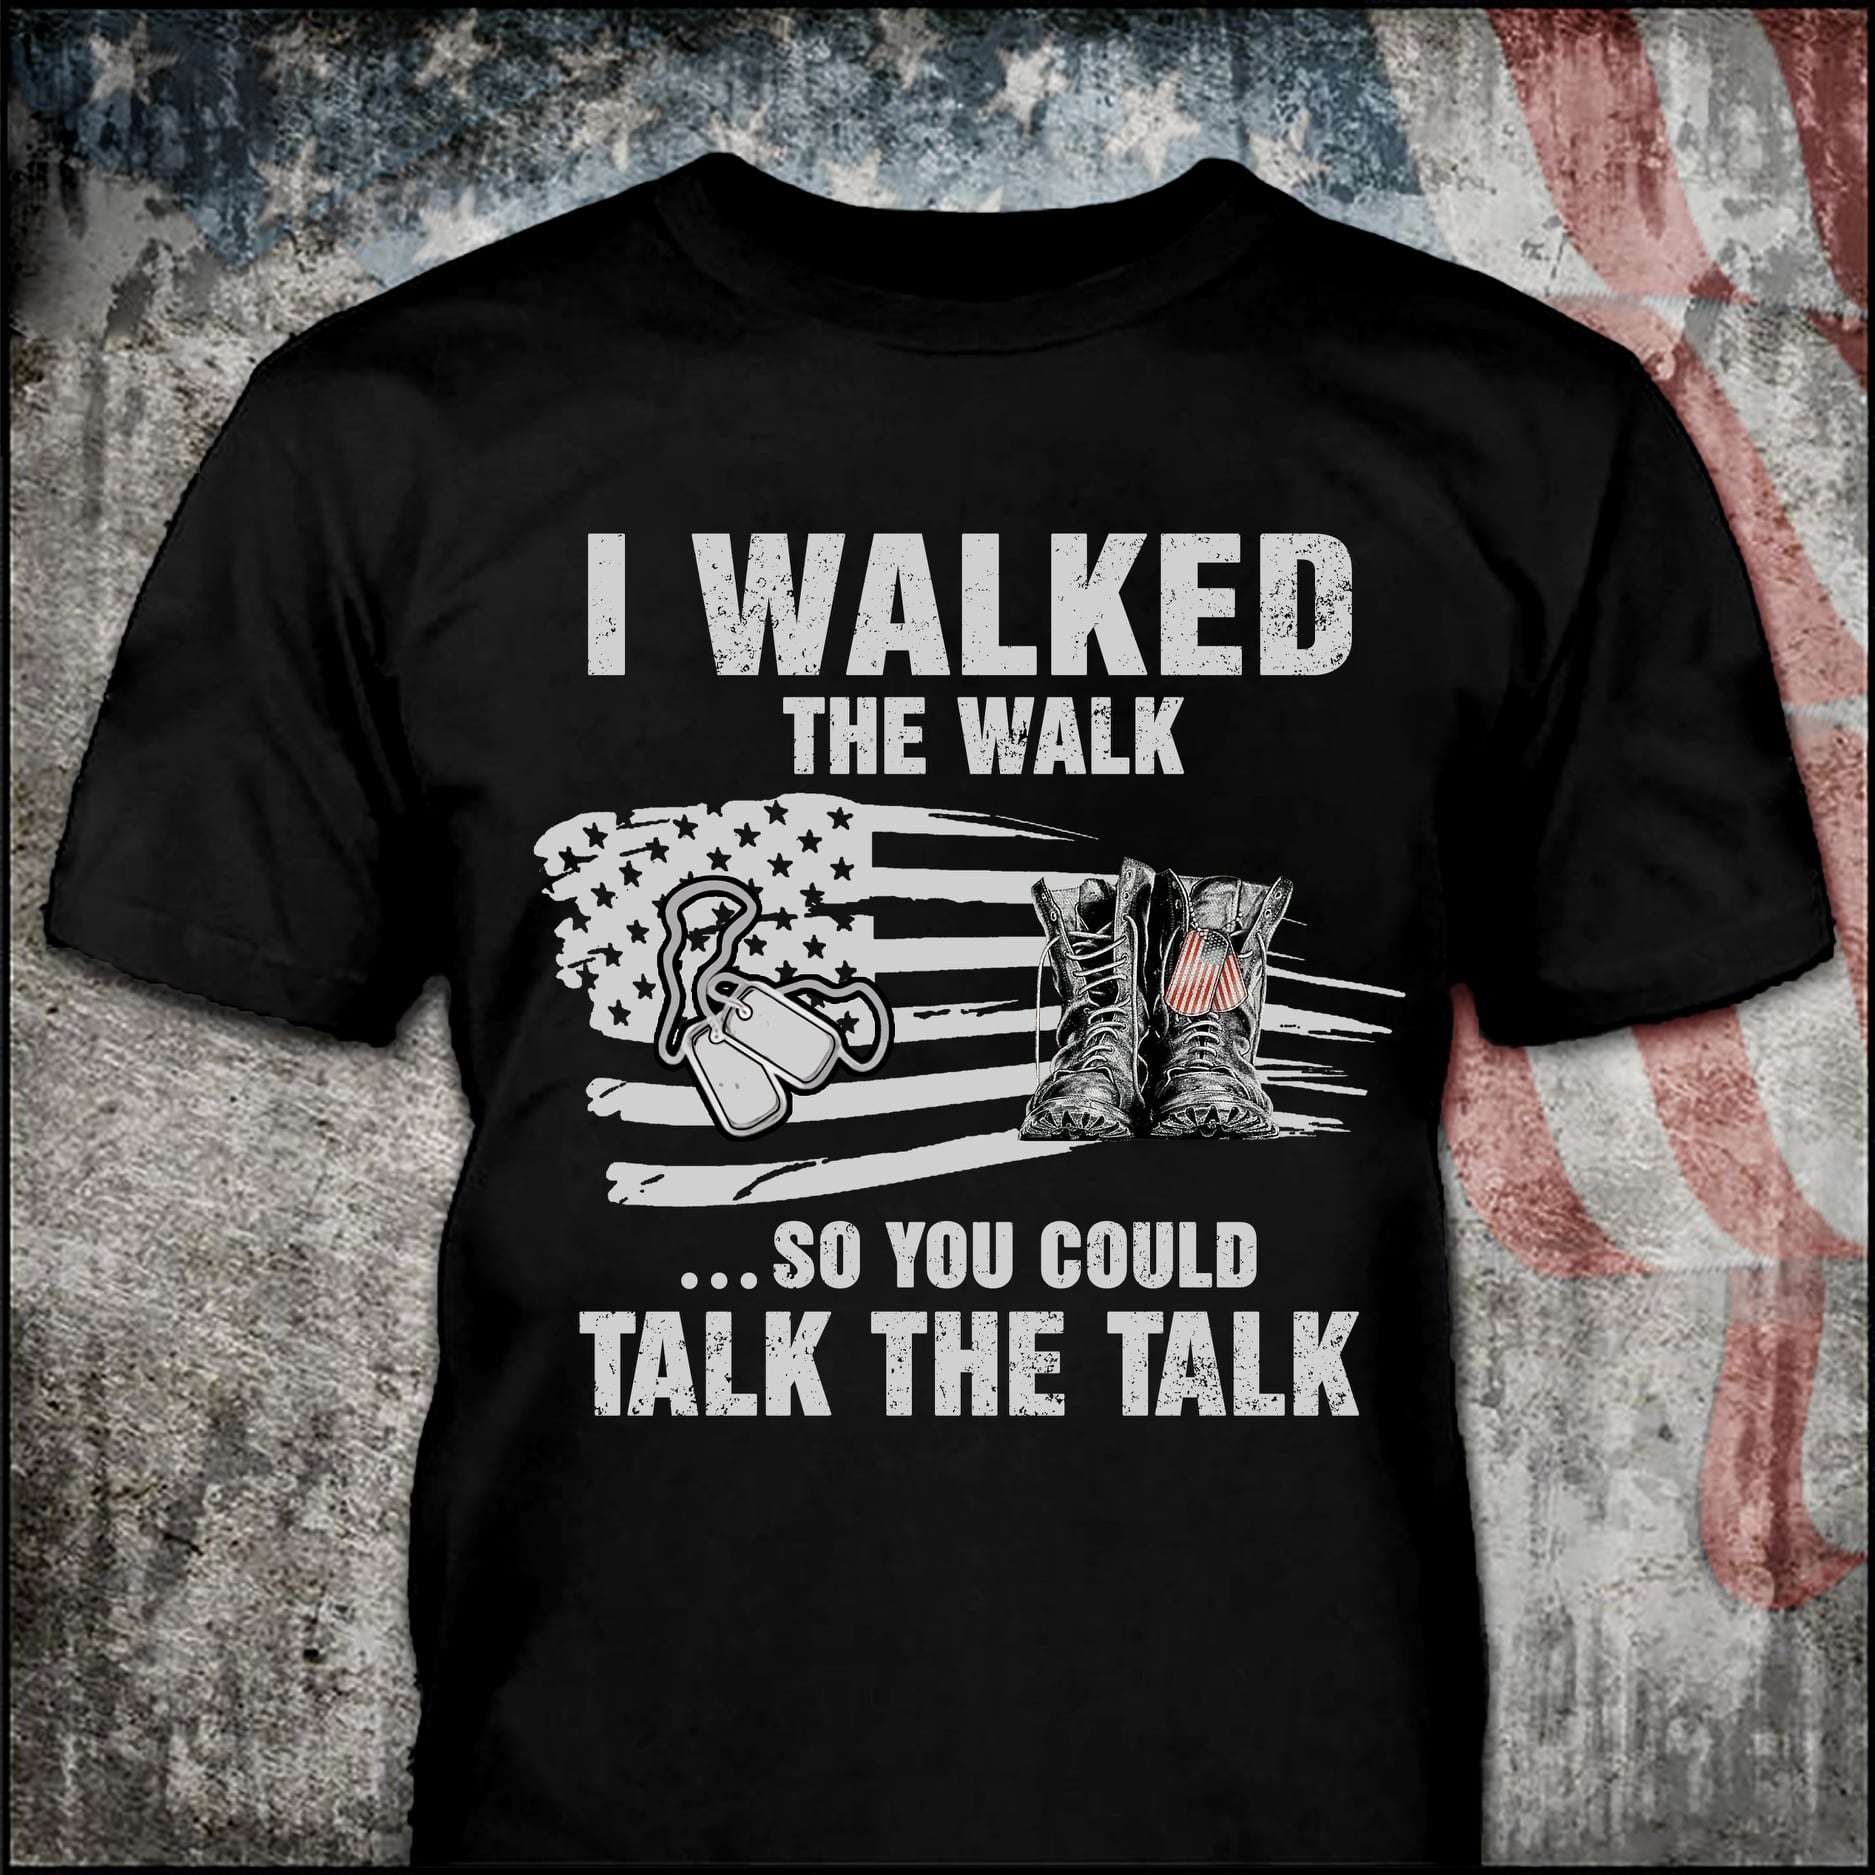 Veteran Shoes, America Flag - I walked the walk so you could talk the talk